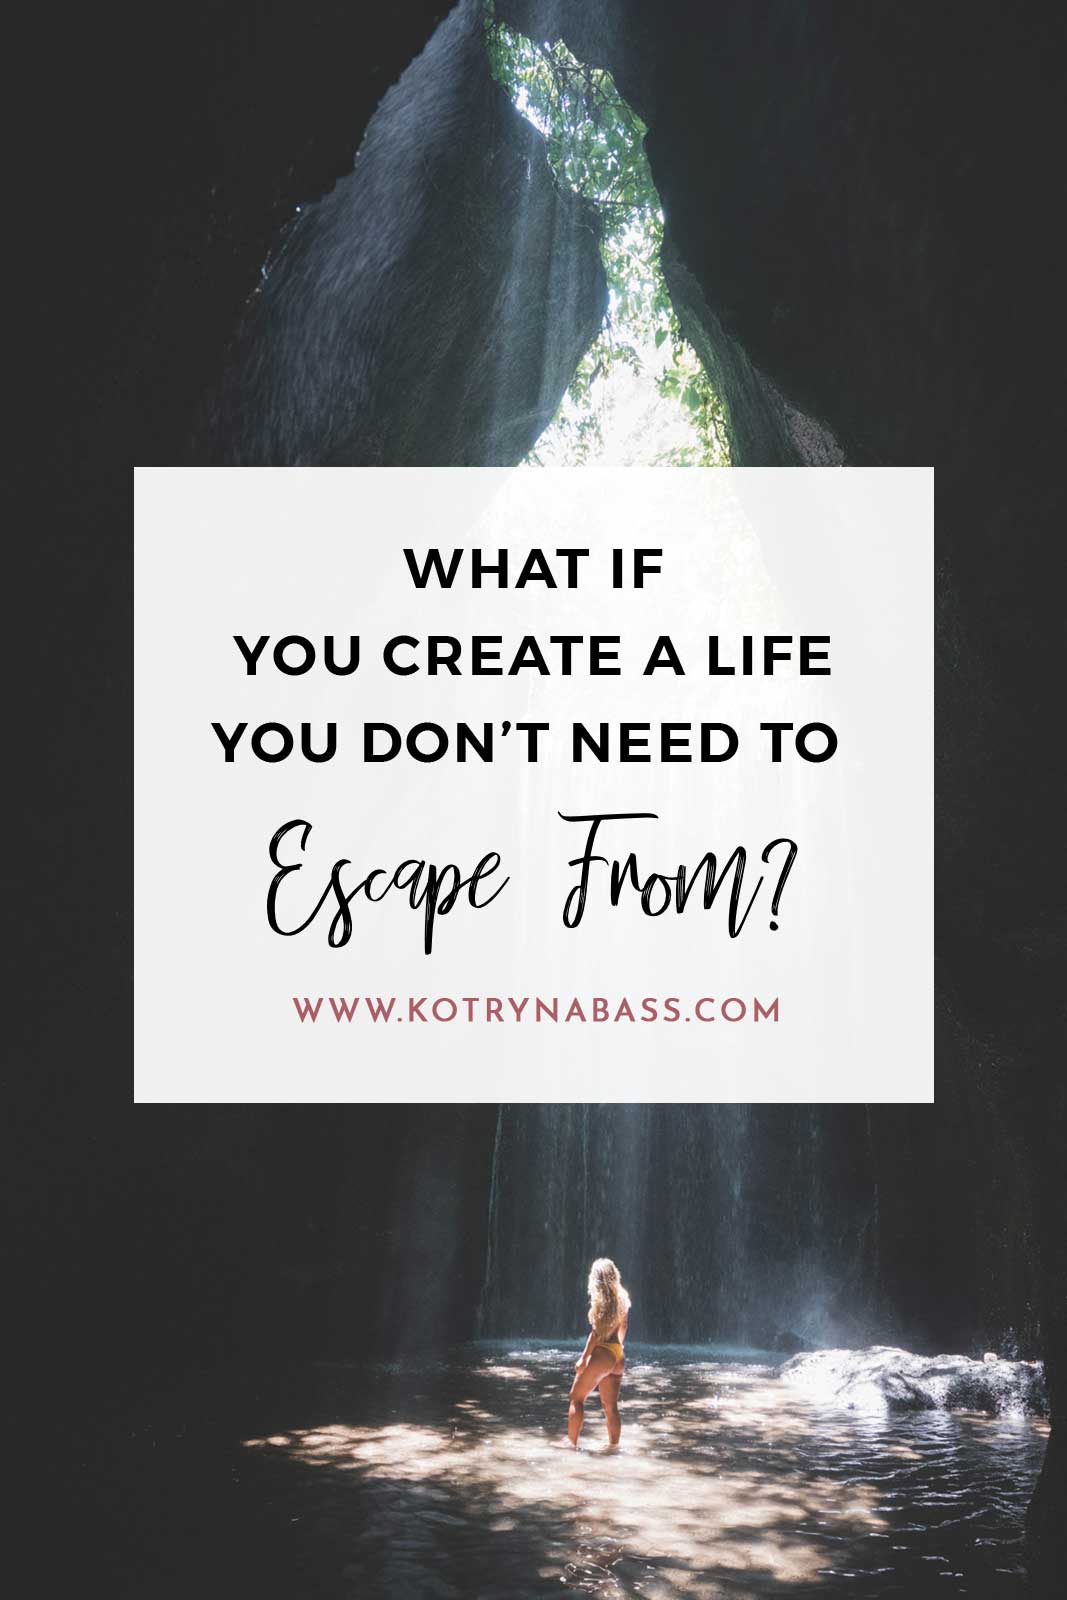 Everyone want to know how to create a dream life and the great thing is- we all have that answer within us... Read this post to get inspired and start making your dreams happen TODAY!